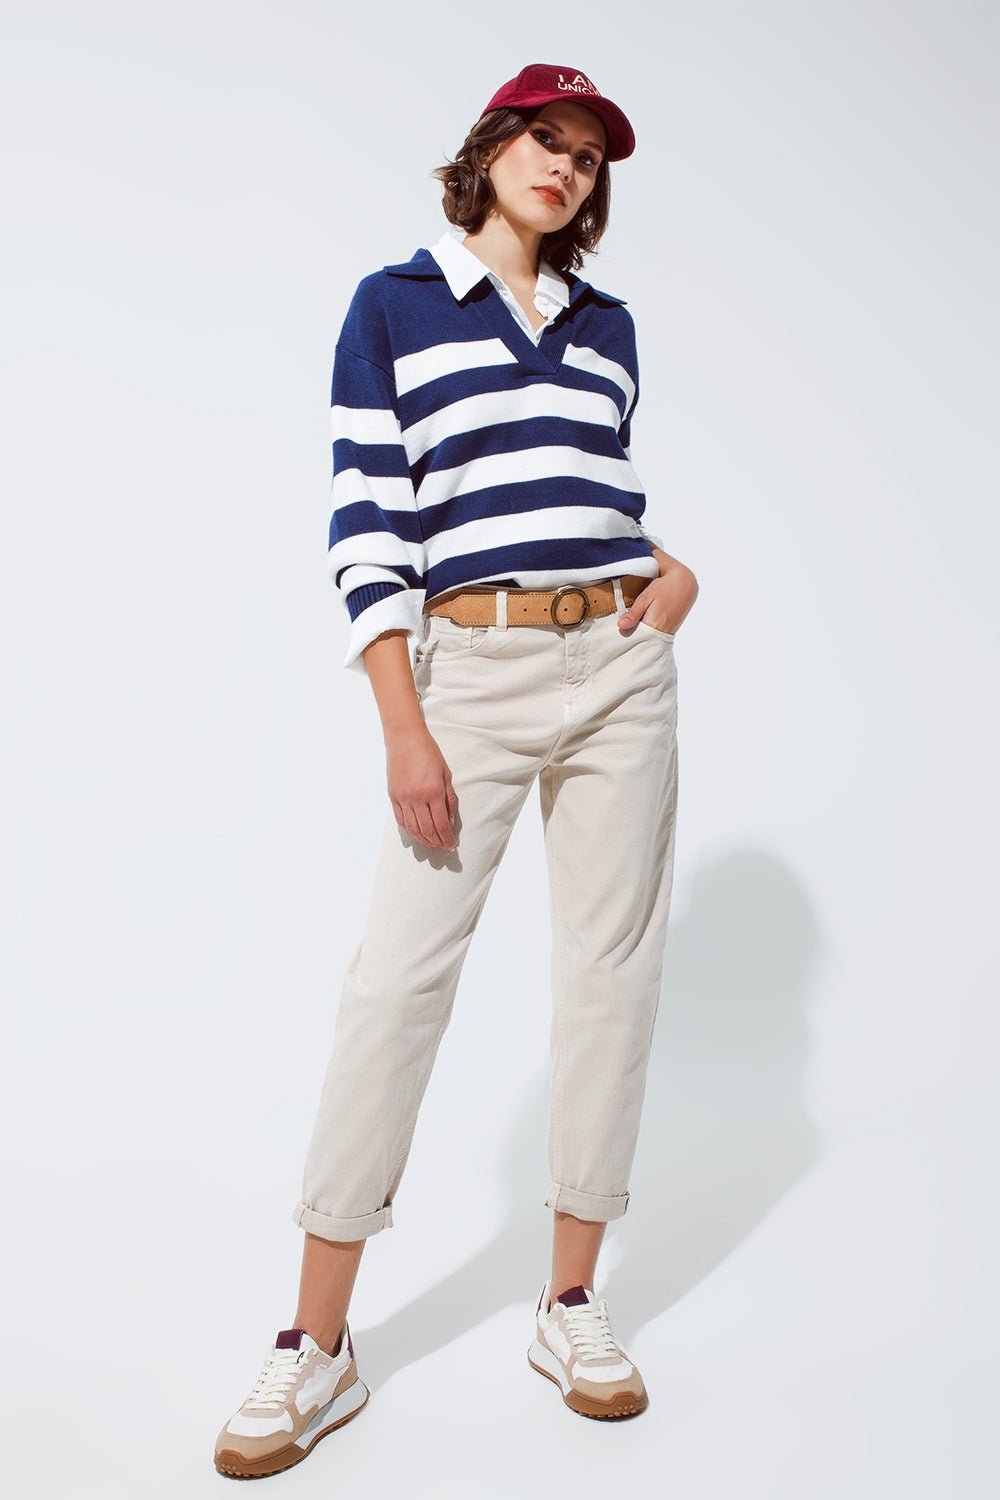 Blue and White Striped Sweater With v Neck and Polo Collar - Mack & Harvie